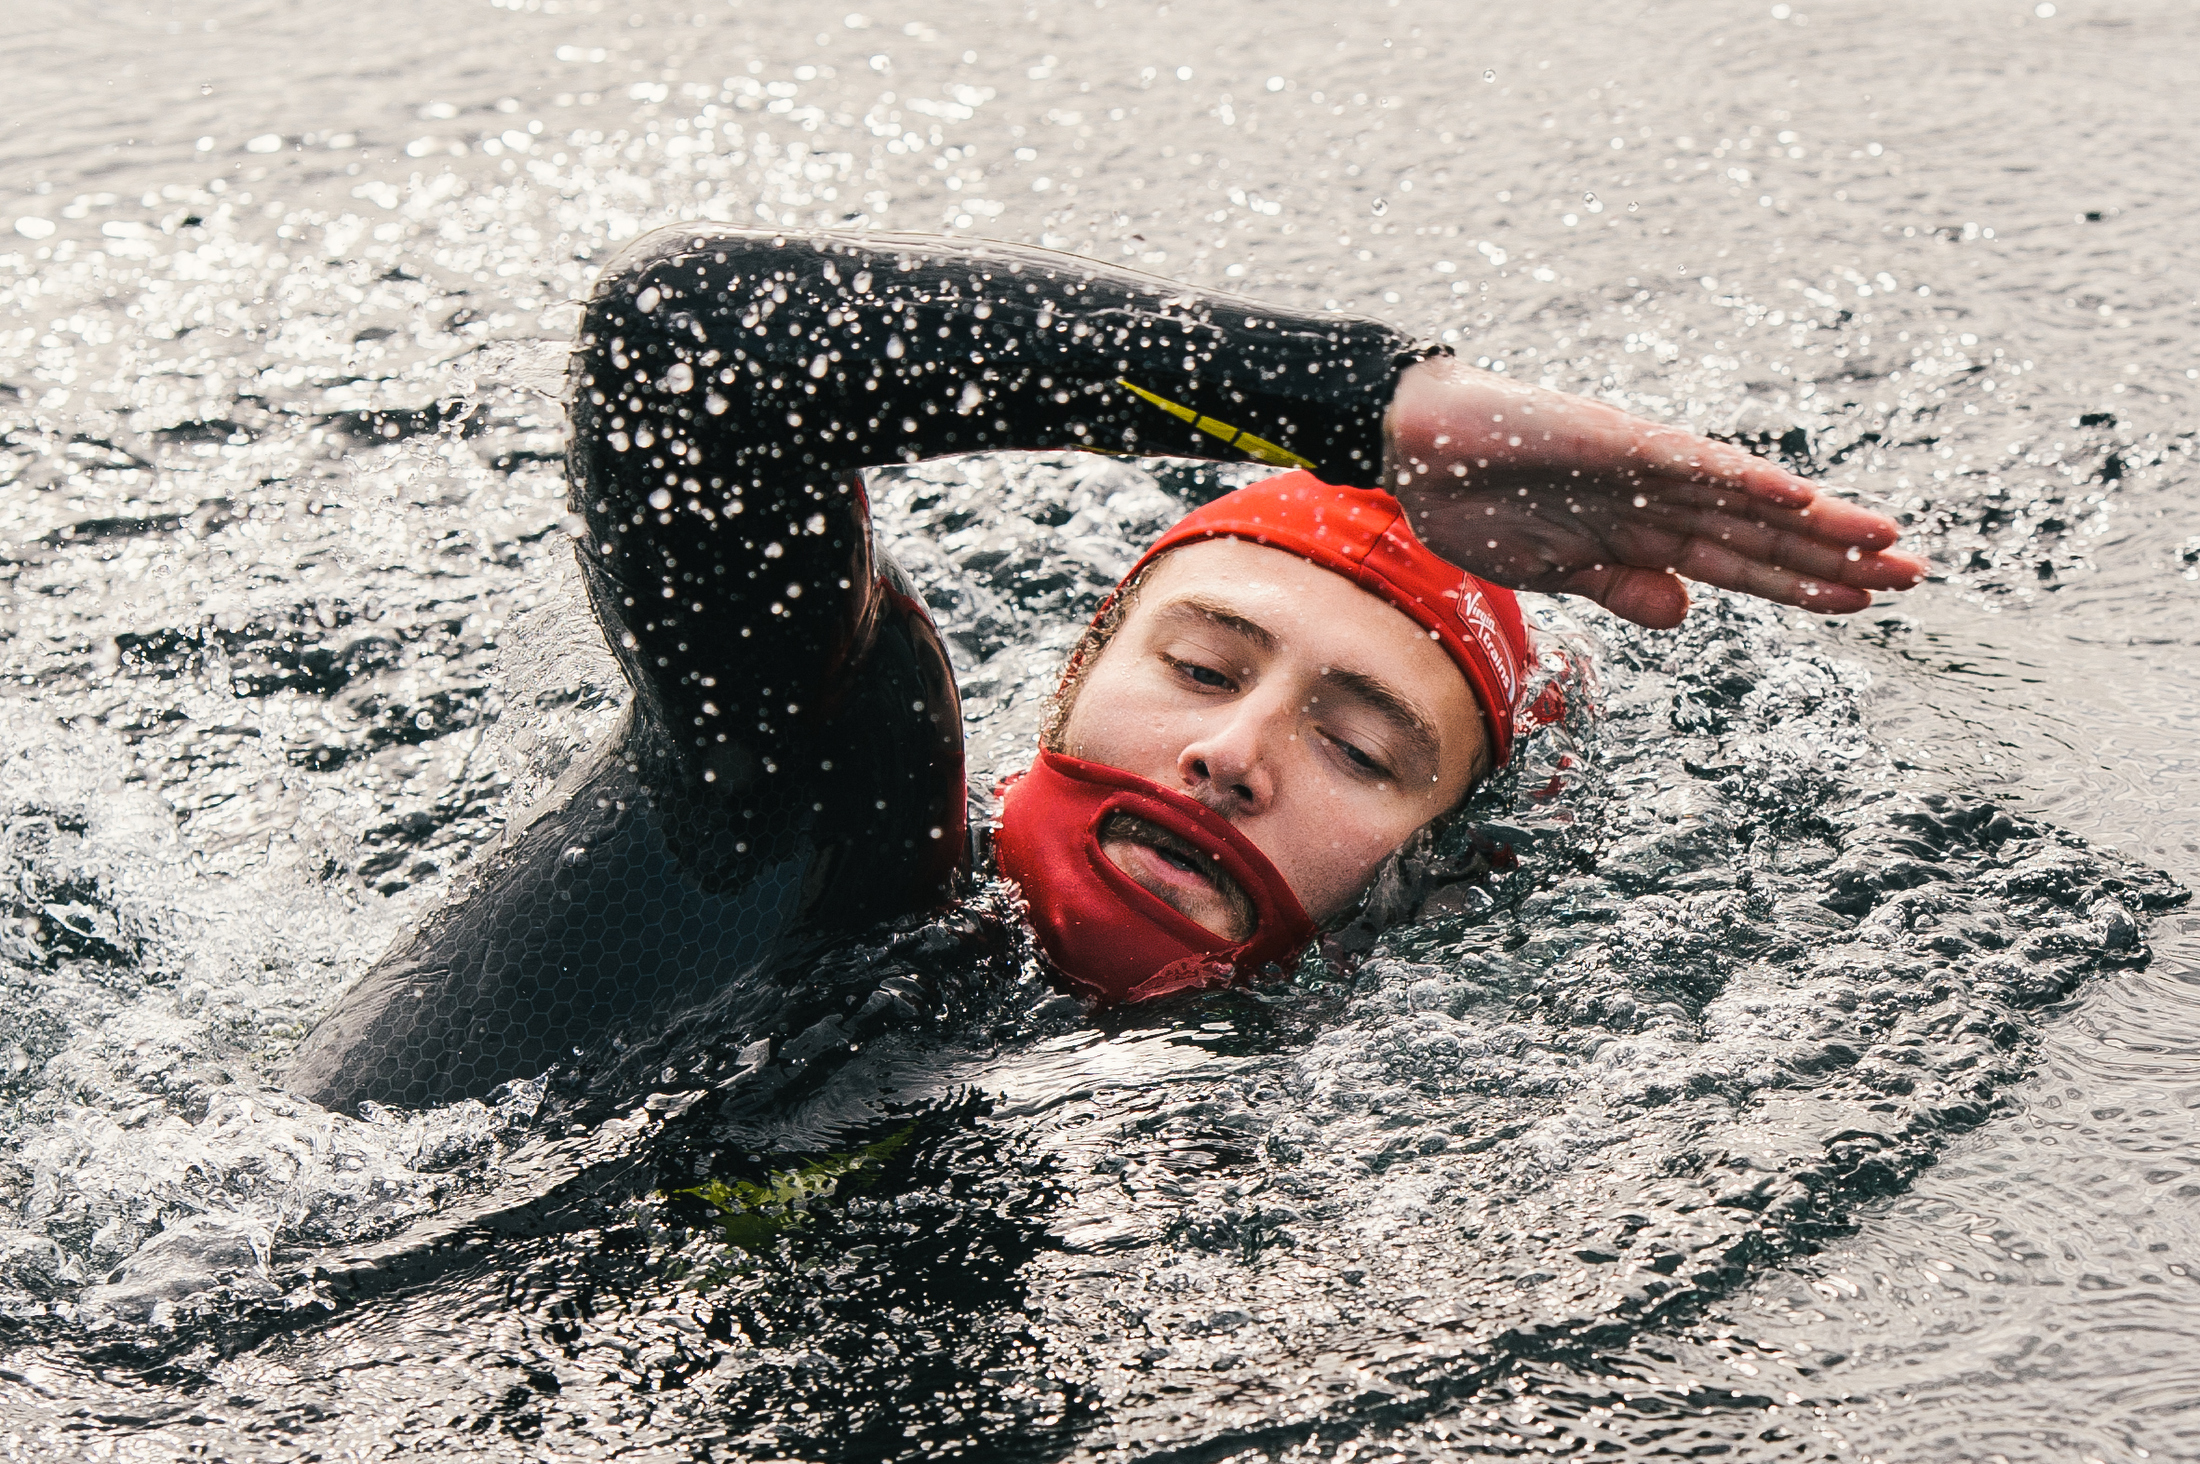 Virgin Trains, official train partner to the Great North Swim, has launched an innovative swim cap for bearded men – the Beard Cap - which will be trialled with customers competing at the Great North Swim, Lake Windermere, June 12 – 14, 2015. Responding to debates on swimming forums about big beards causing drag, Virgin Trains commissioned its own research which revealed that over one in ten men (12 per cent) connected their beard to slower swim times, and nearly a quarter of men feel their beards hinder their sports performance. For swimmers, spectators and supporters planning a weekend away to the Lakes during the Great North Swim, there are exclusive discounts of up to 50%  across Virgin Trains First and Standard Advance Fares. To find out more information and buy tickets to travel to The Great North Swim visit http://www.virgintrains.co.uk/nova/